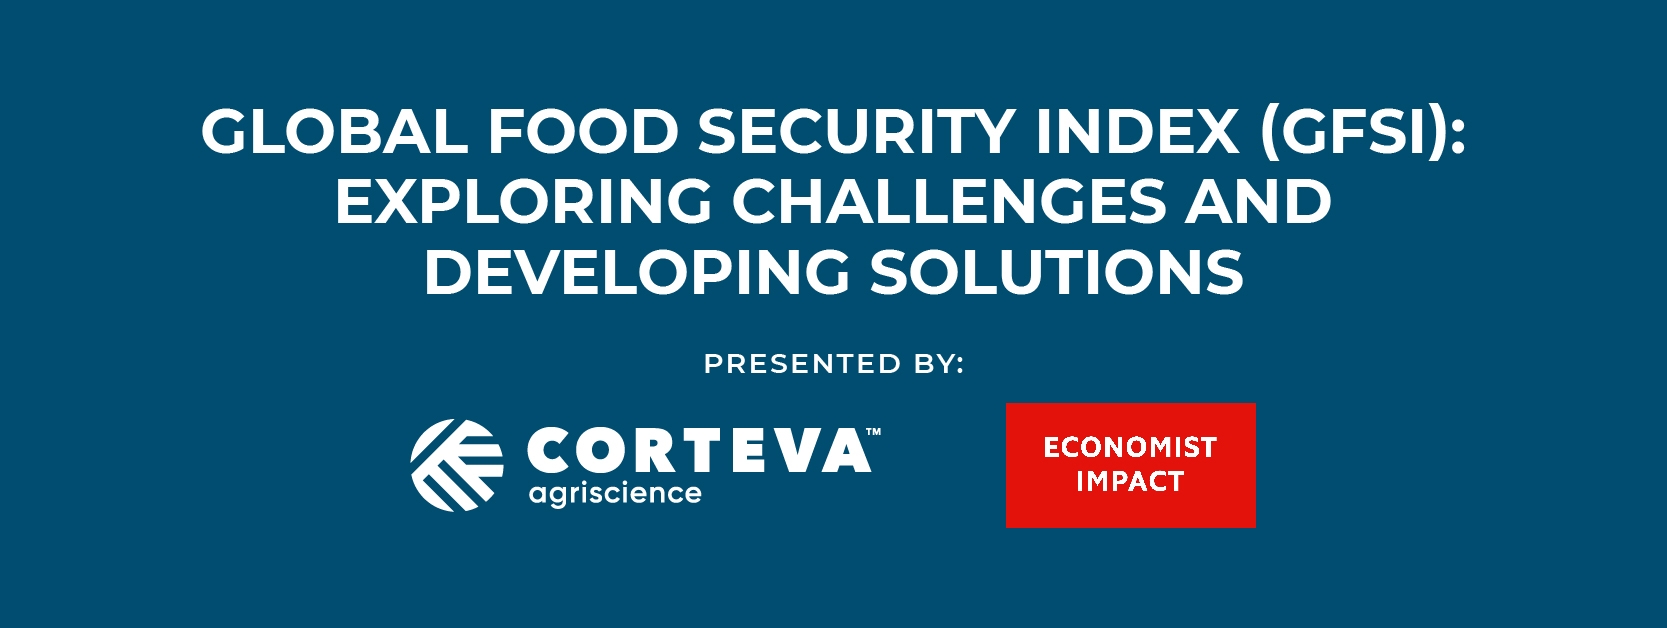 The Global Food Security Index: Exploring Challenges and Developing Solutions